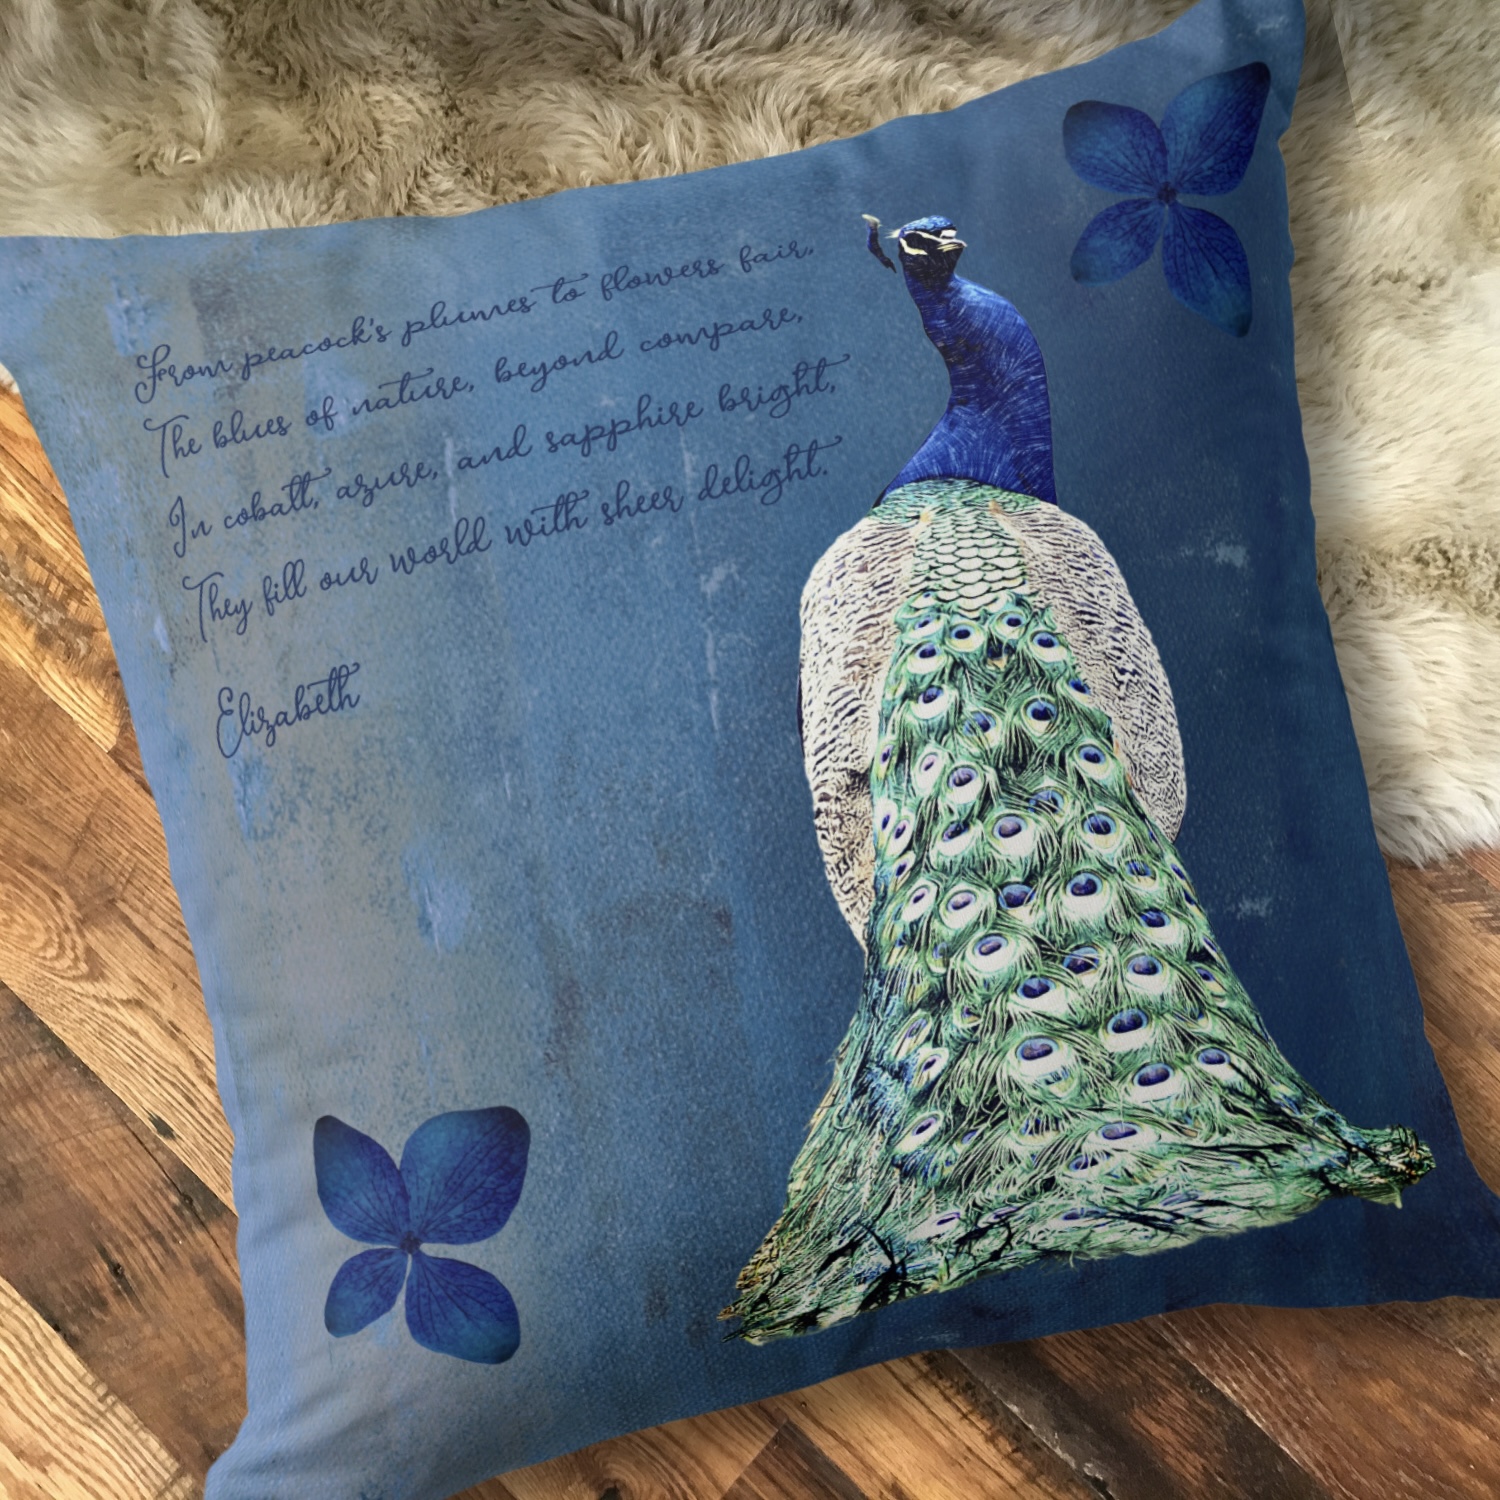 Washed out cobalt blue throw pillow with a blue peacock as center image, and an inspirational message. Nostalgic vintage design.